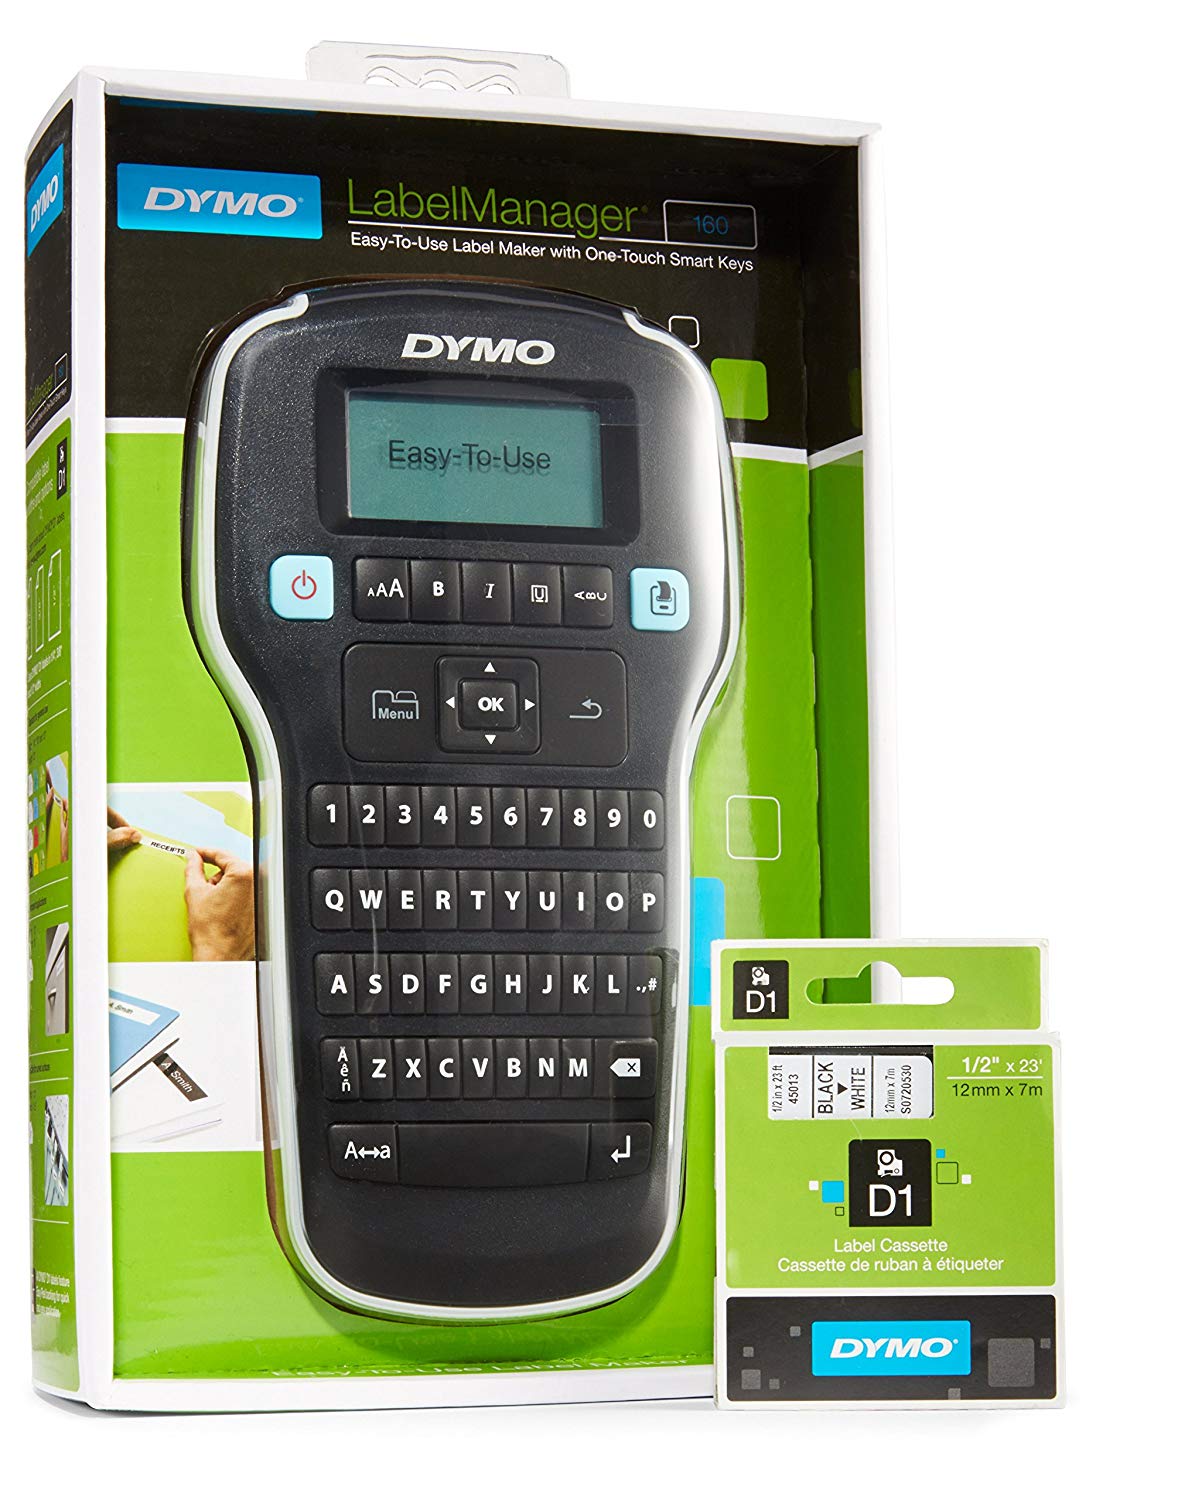 Dymo labelmanager rechargeable.